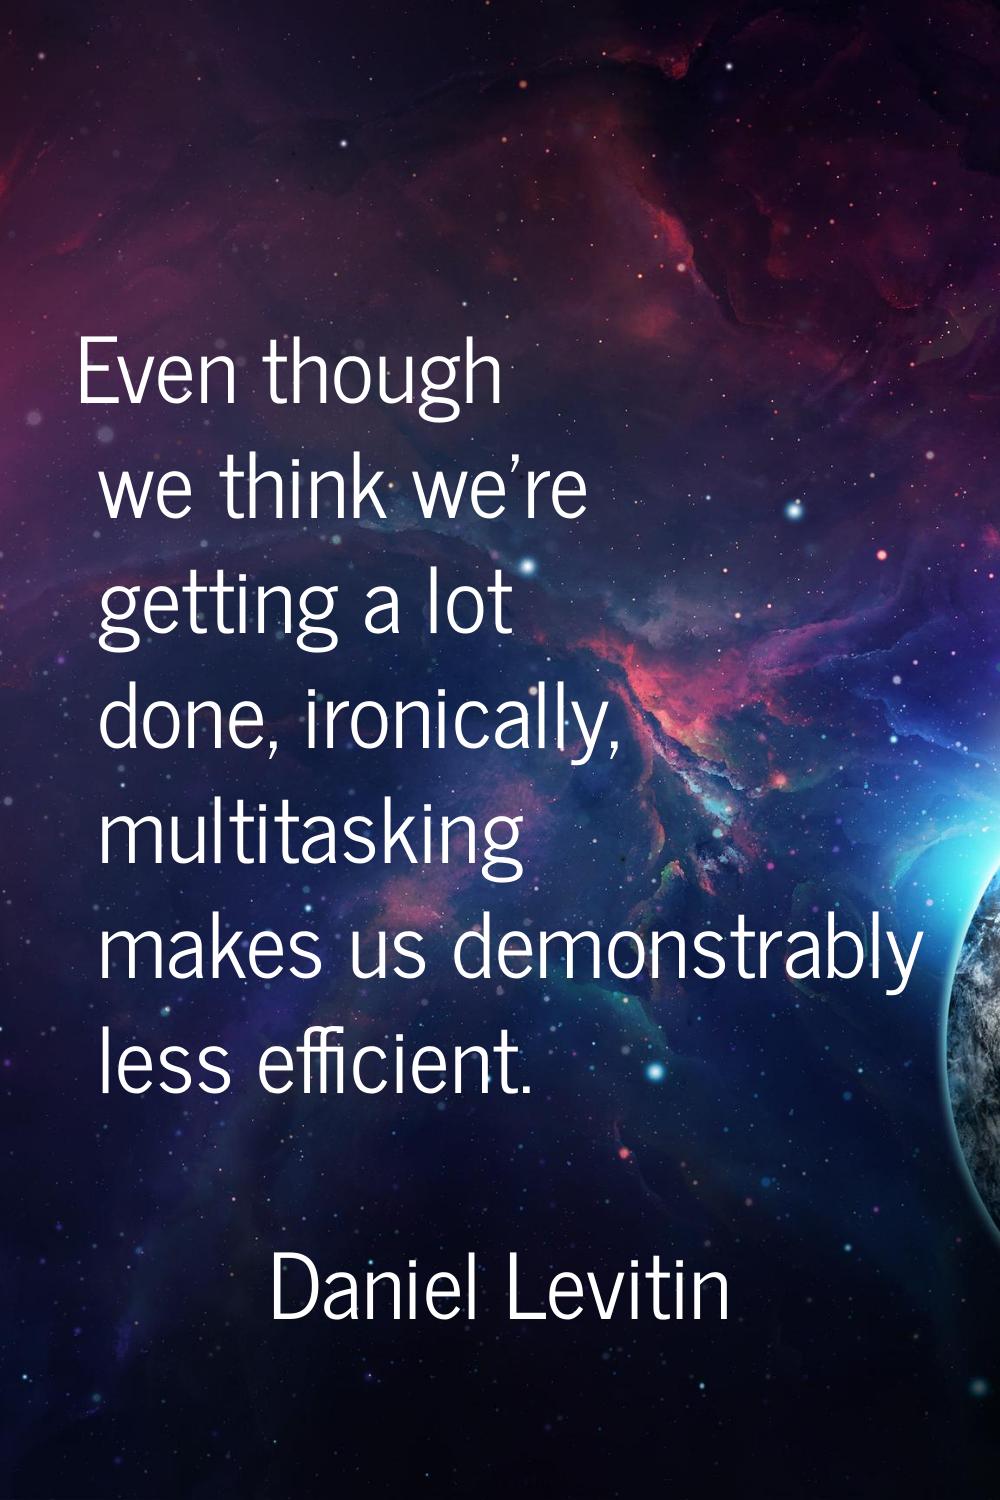 Even though we think we're getting a lot done, ironically, multitasking makes us demonstrably less 